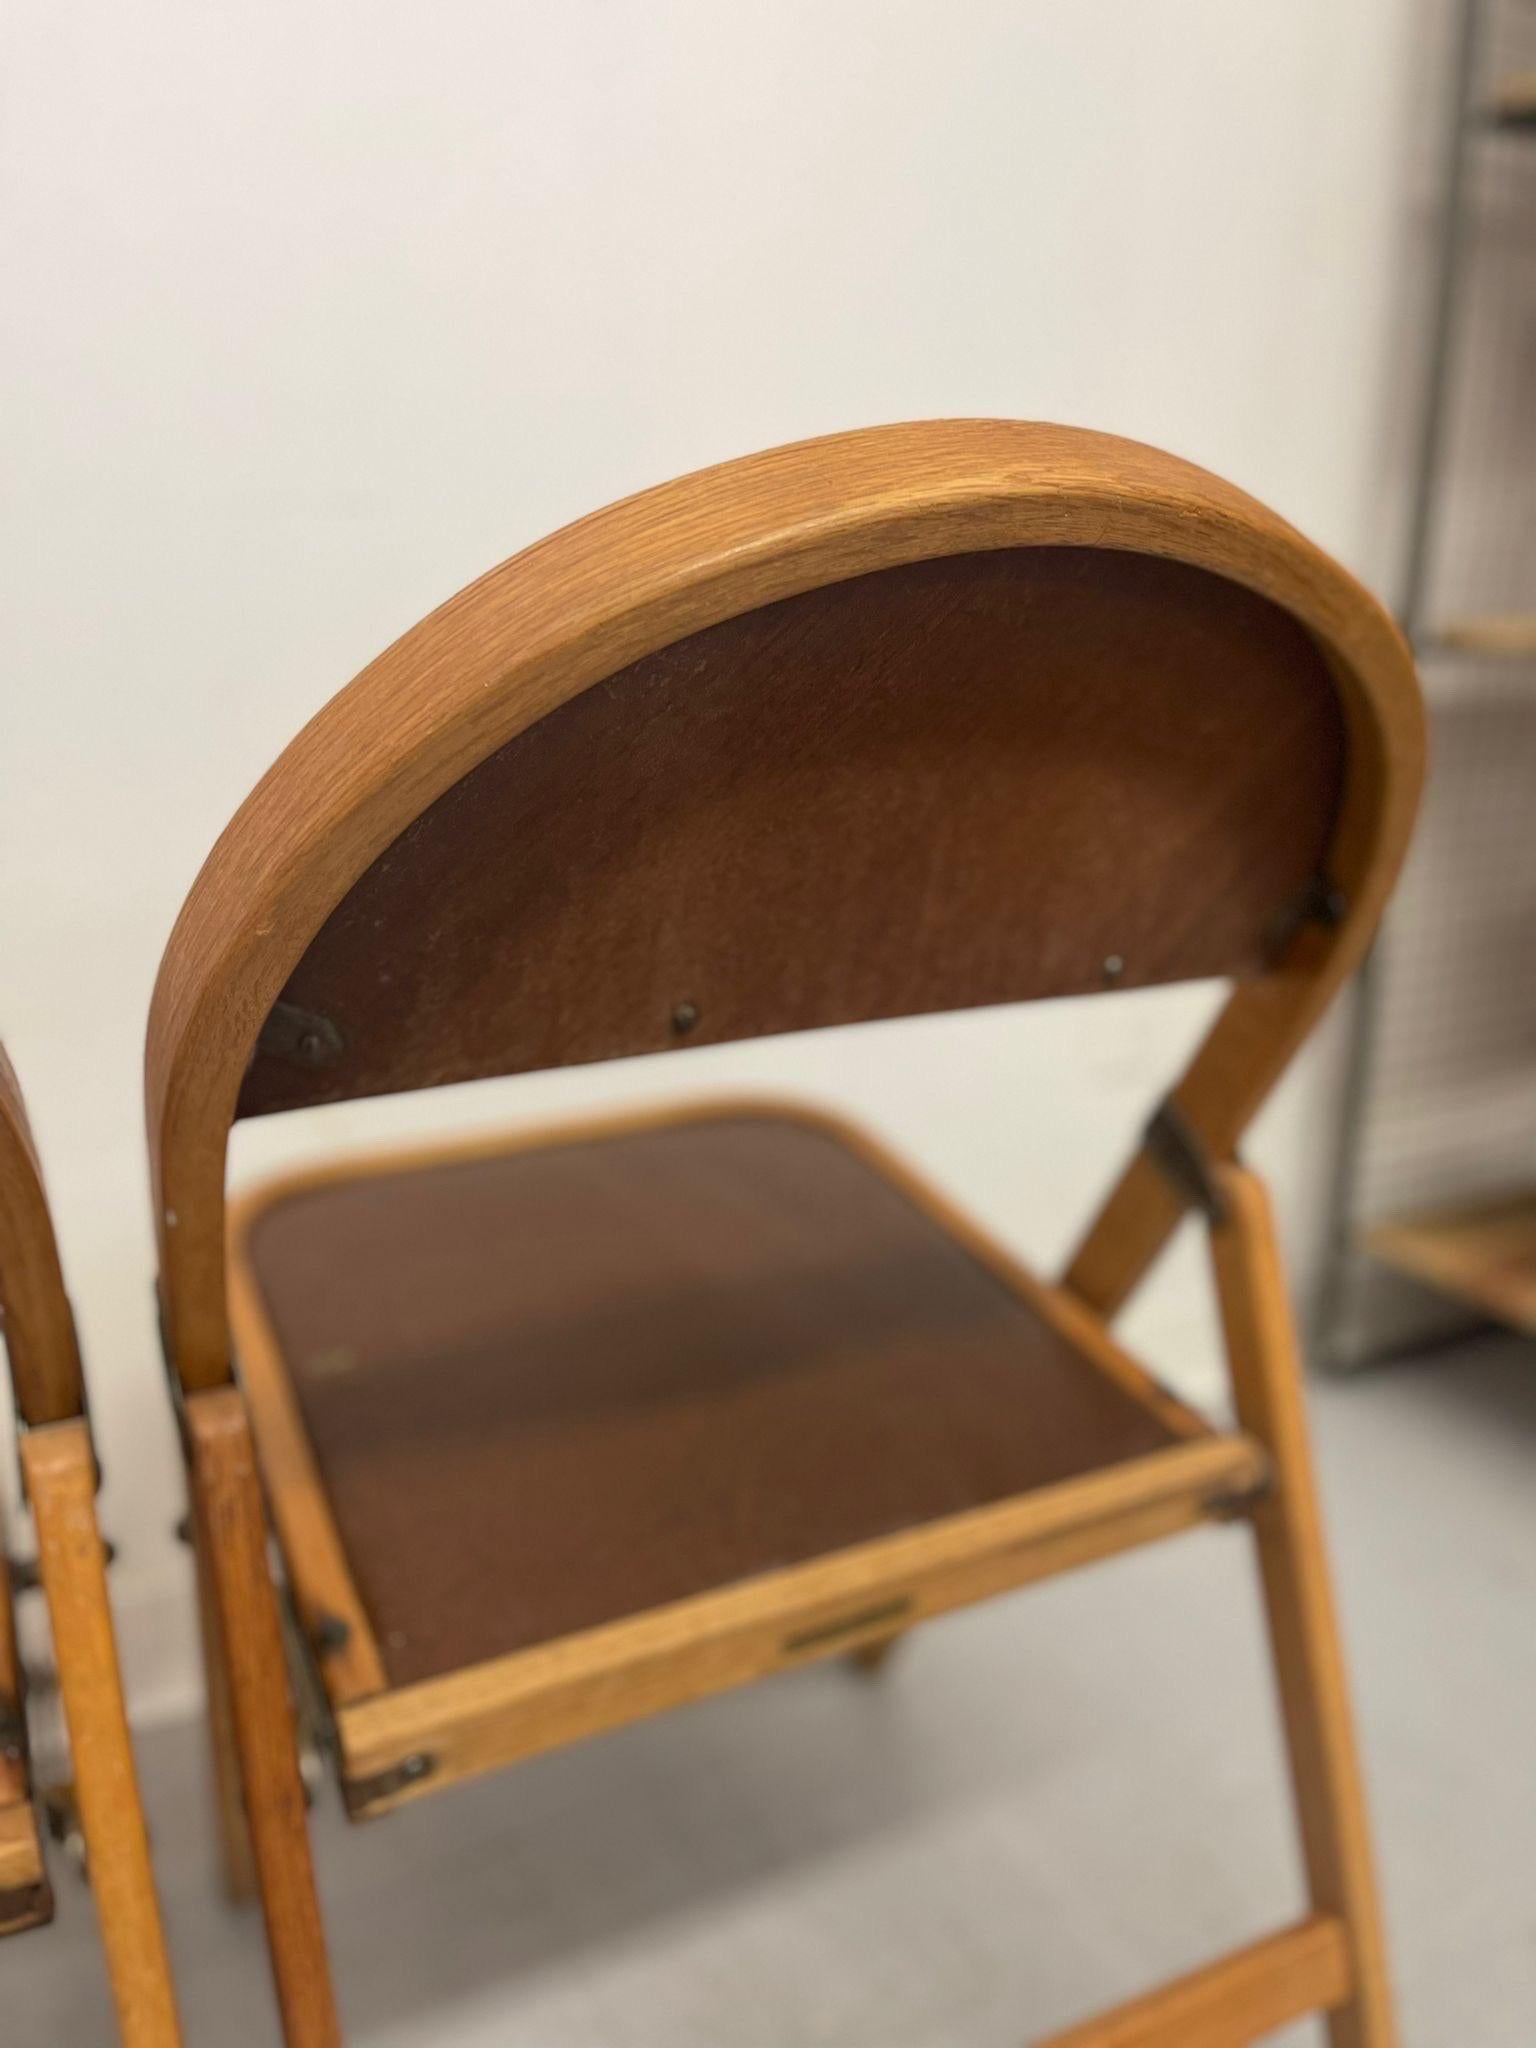 Late 20th Century Vintage Mid Century Modern  Folding Chairs by Clarin. Set of Two

 For Sale